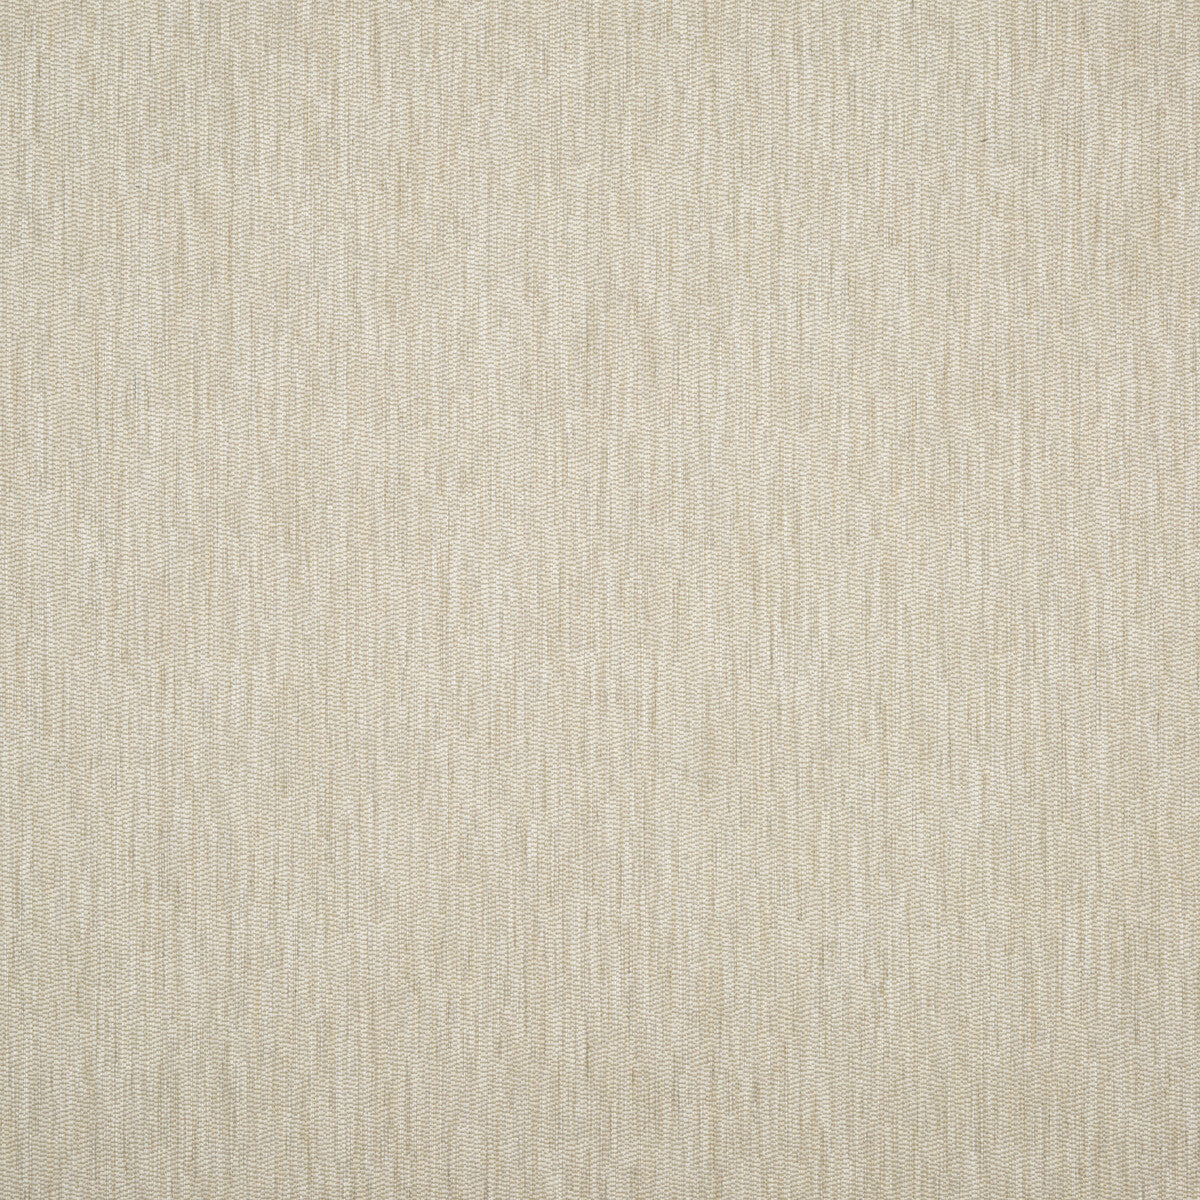 Marcella fabric in champagne color - pattern ED85263.125.0 - by Threads in the Odyssey collection